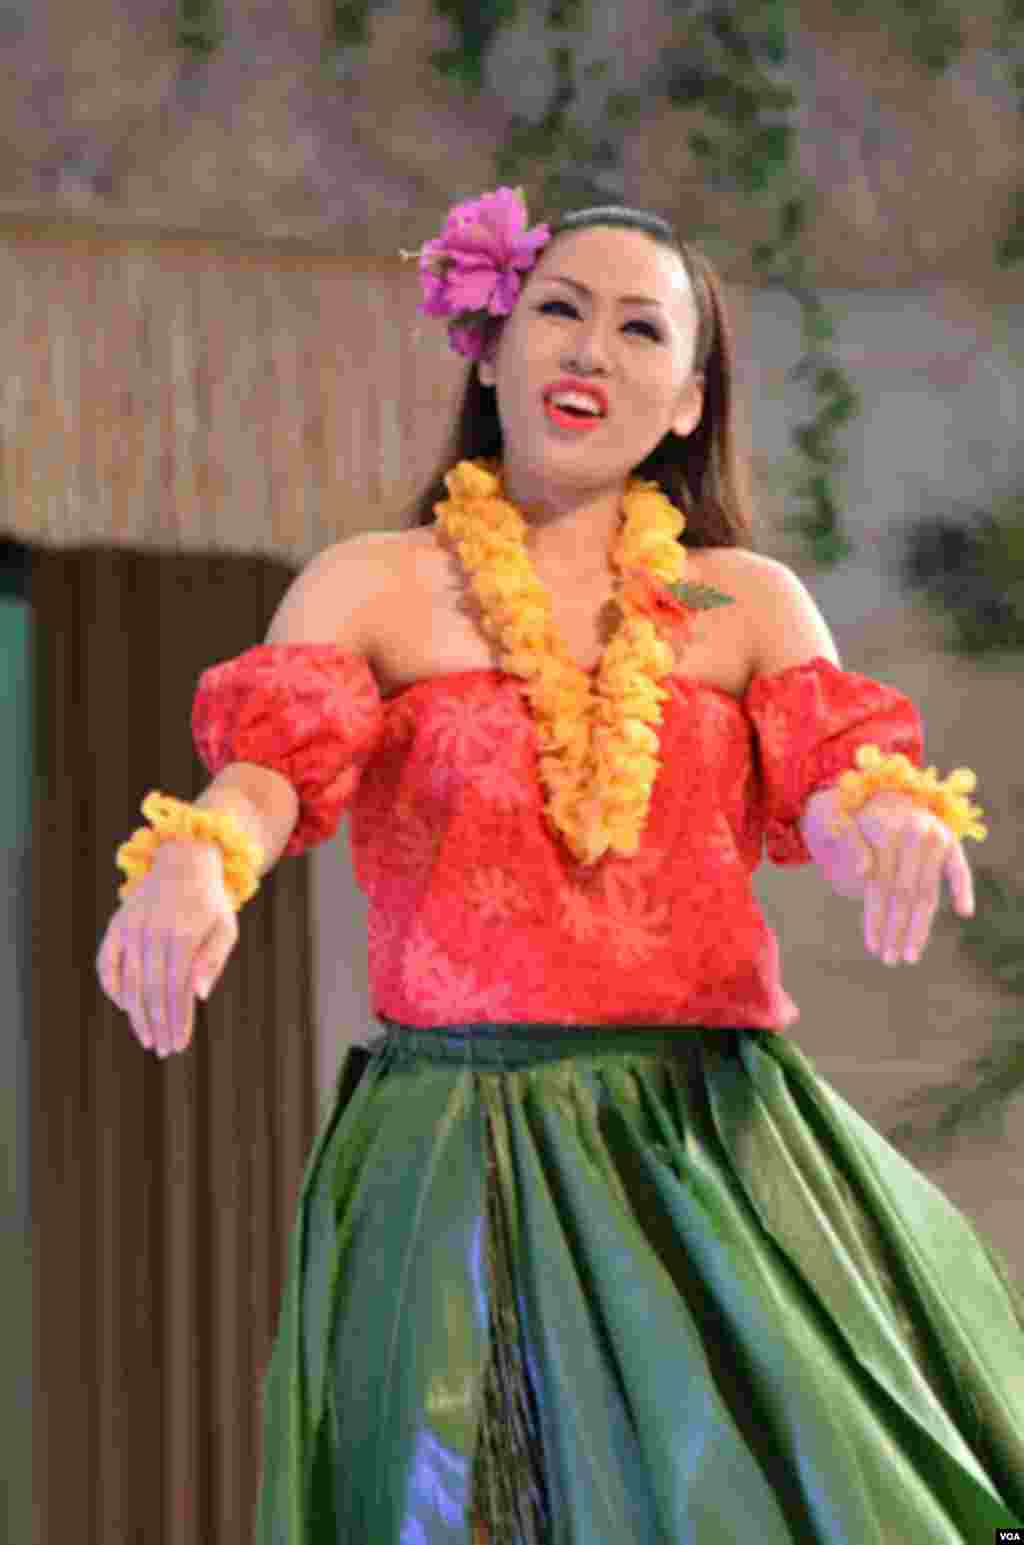 Mutsumi Kudo says after the 2011 disaster she and the rest of the hula dancers no longer take for granted having an audience, October 25, 2012. (Steve Herman/VOA)